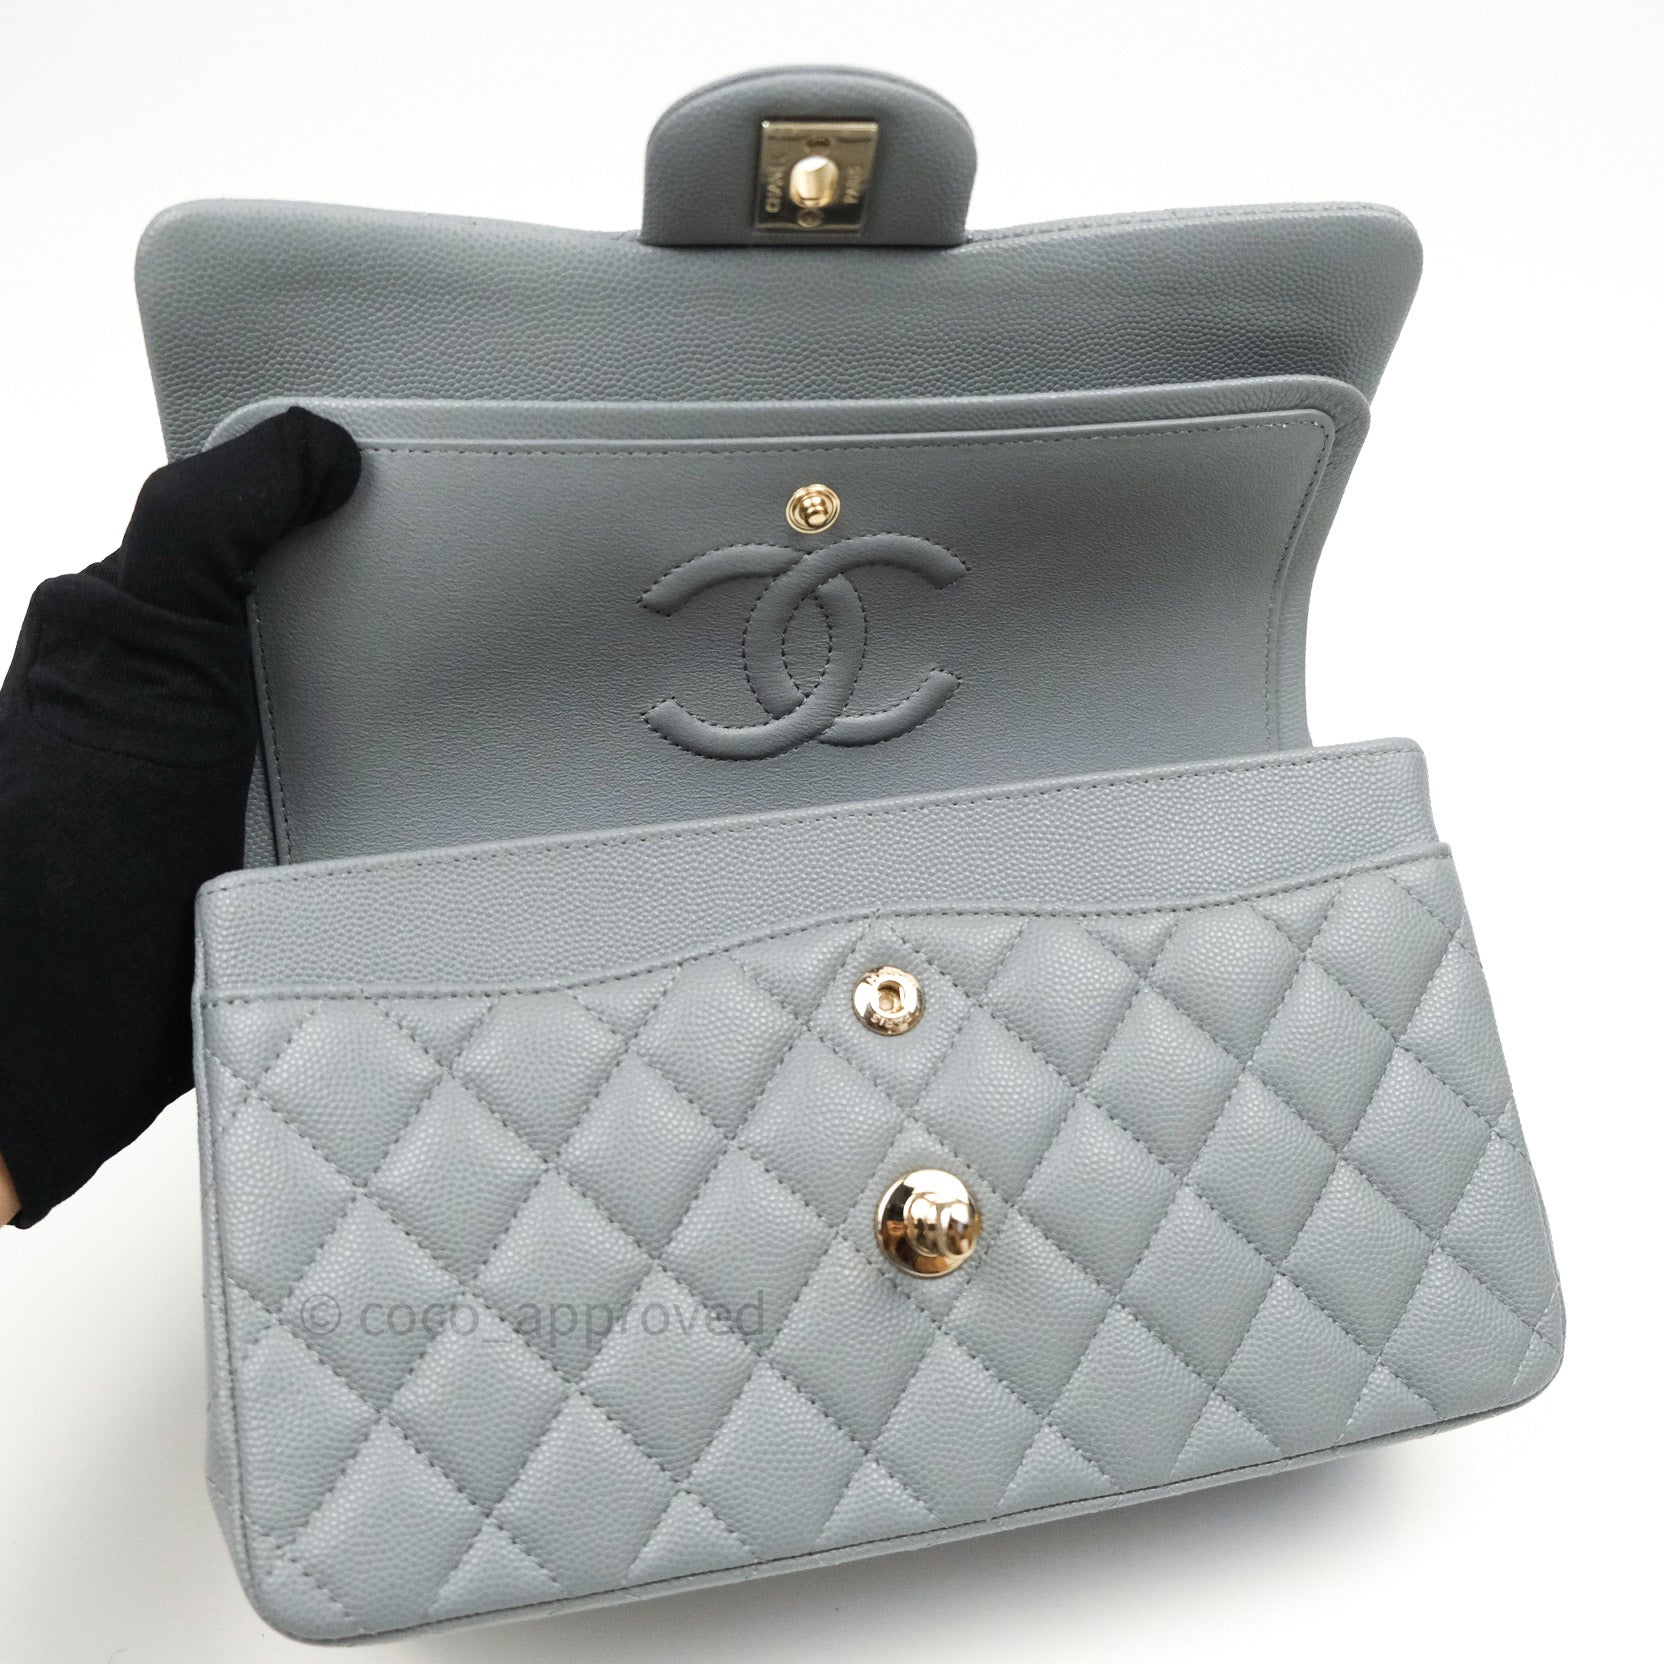 Chanel Small Flap Bag AS3365 B08472 NJ057, Grey, One Size